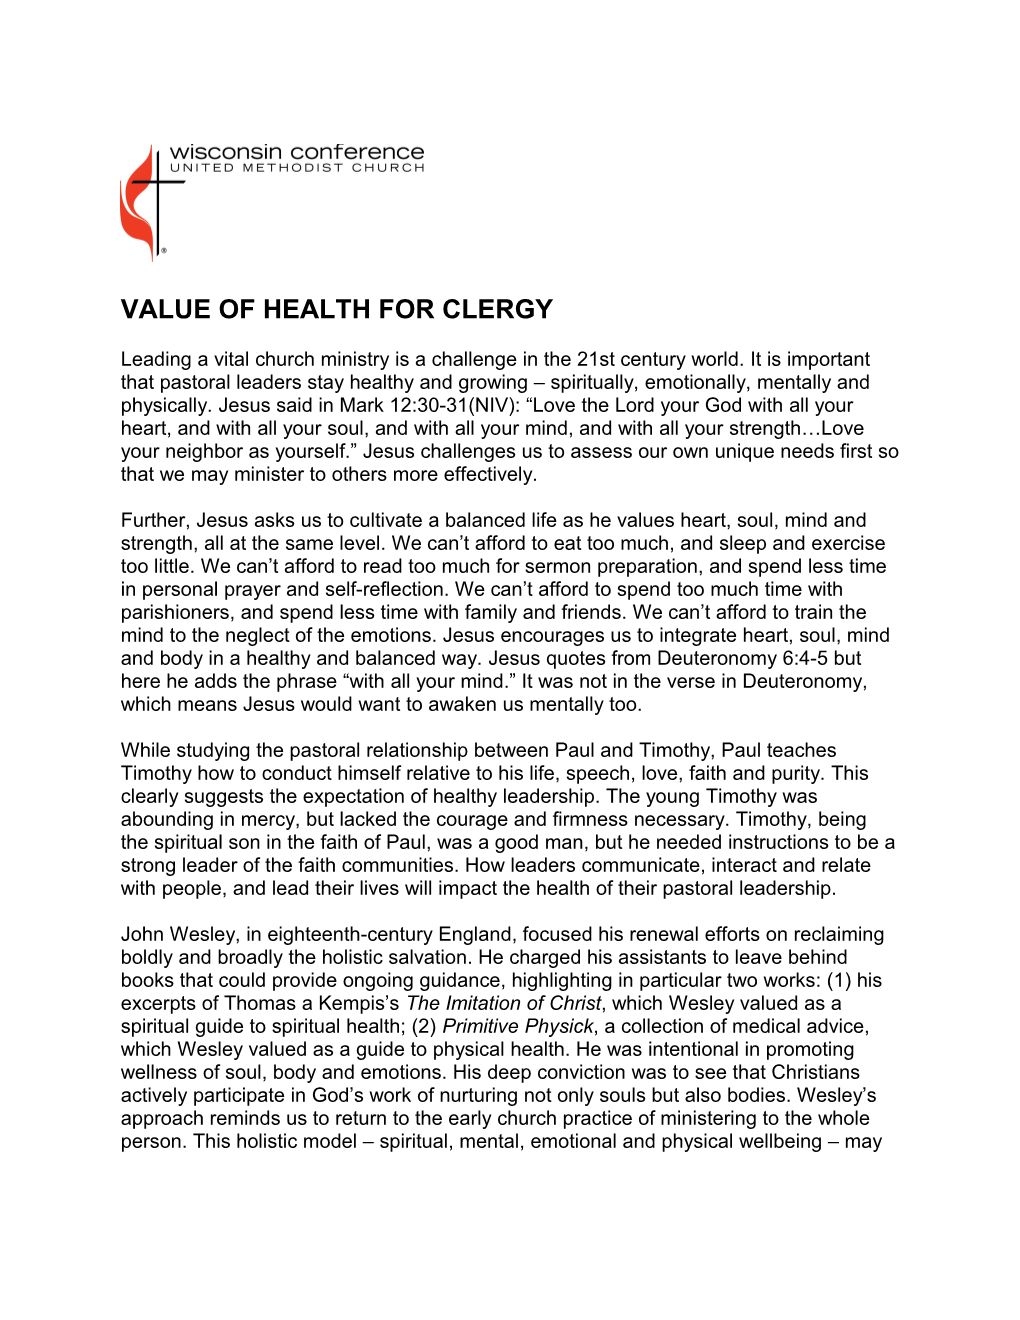 Value of Health for Clergy